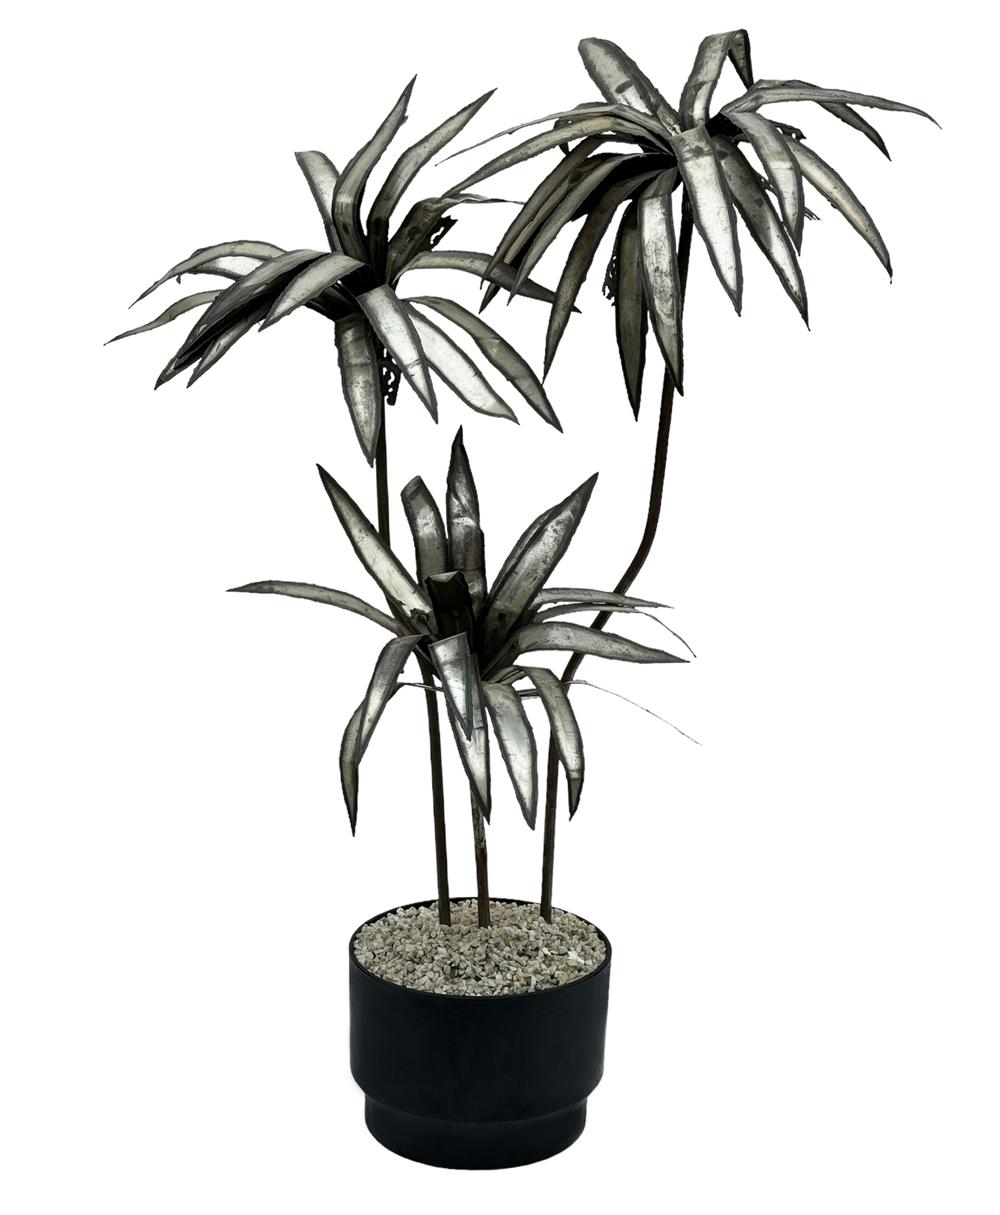 A large and impressive torch cut palm tree sculpture, circa 1970s. It features an all aluminum & steel construction. Nice warm patina. Leaves are adjustable so you can style and model to suit your needs.